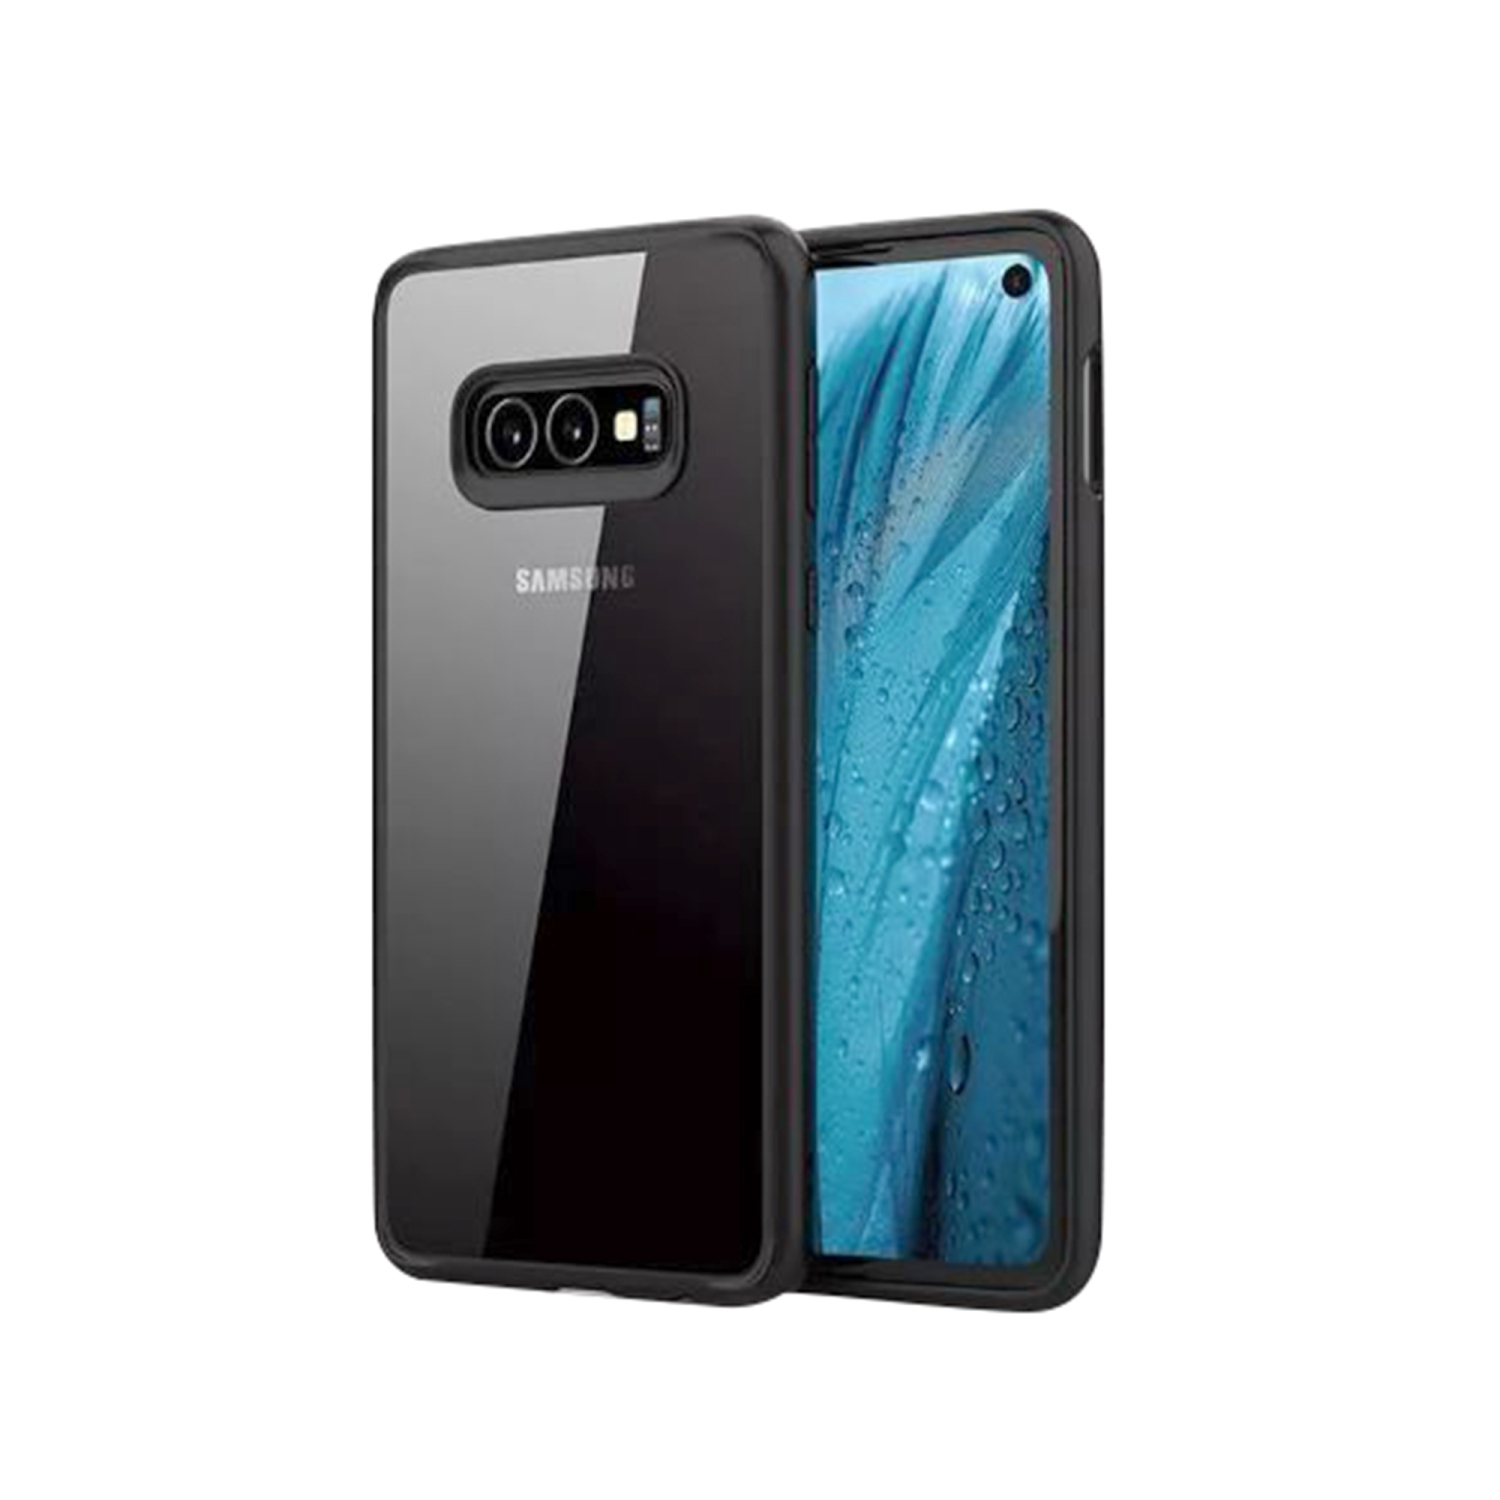 Clear Soft TPU Bumper Stylish Back Cover Phone Case Compatible With Samsung Galaxy S10E - Black